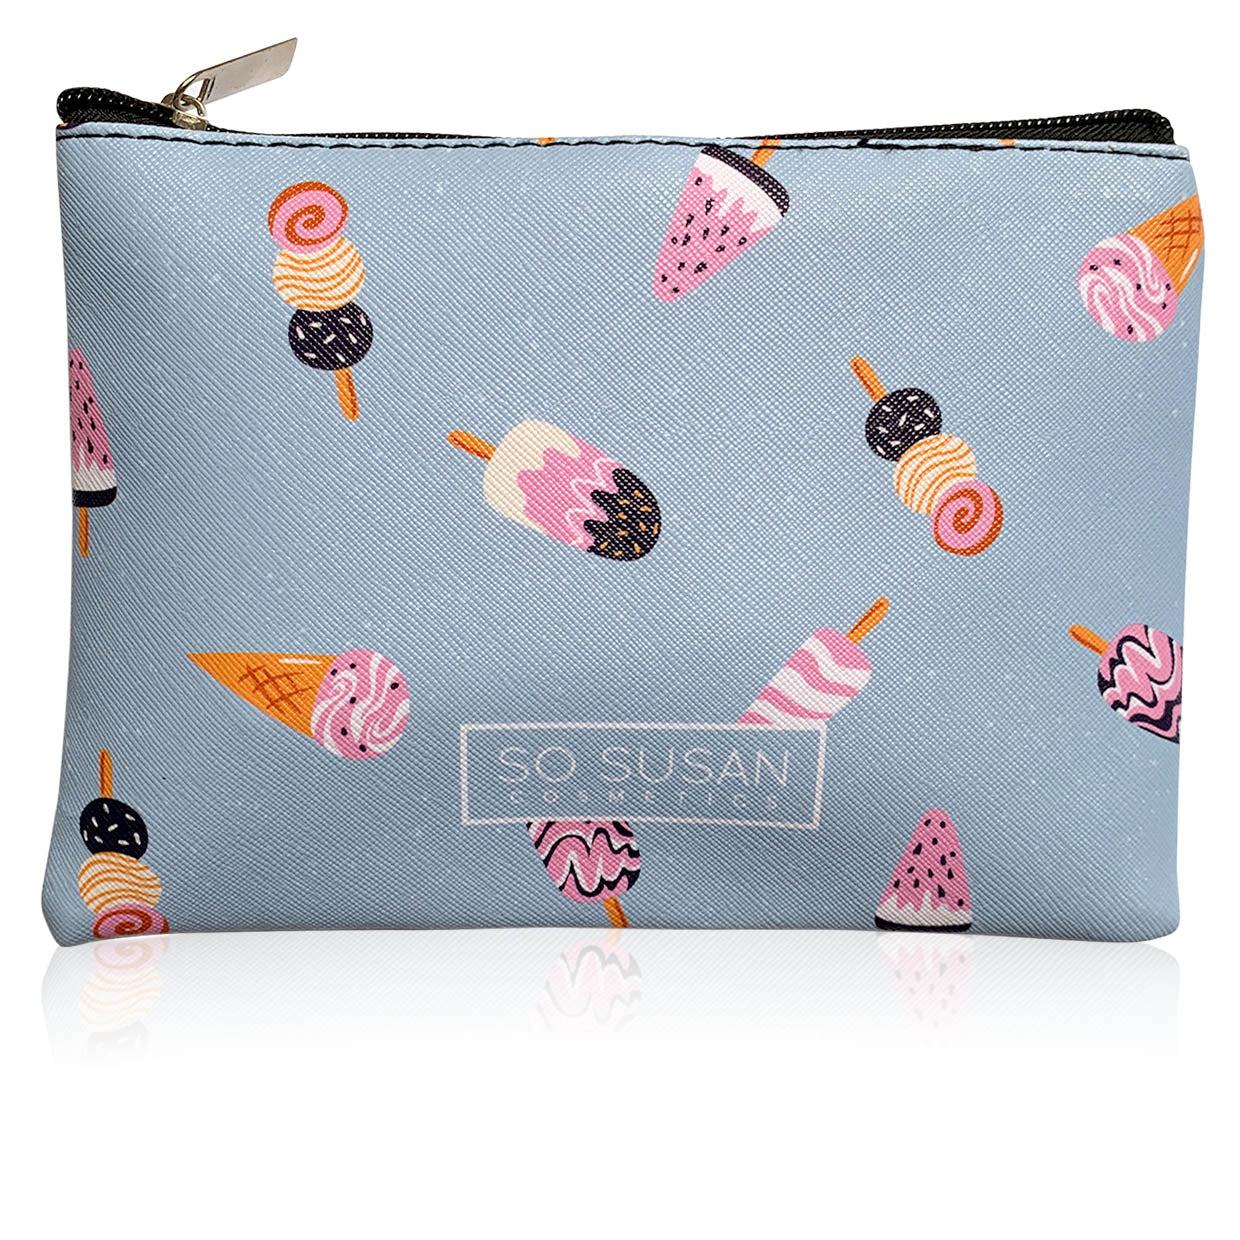 Limited-Edition Makeup Bag - Lollies